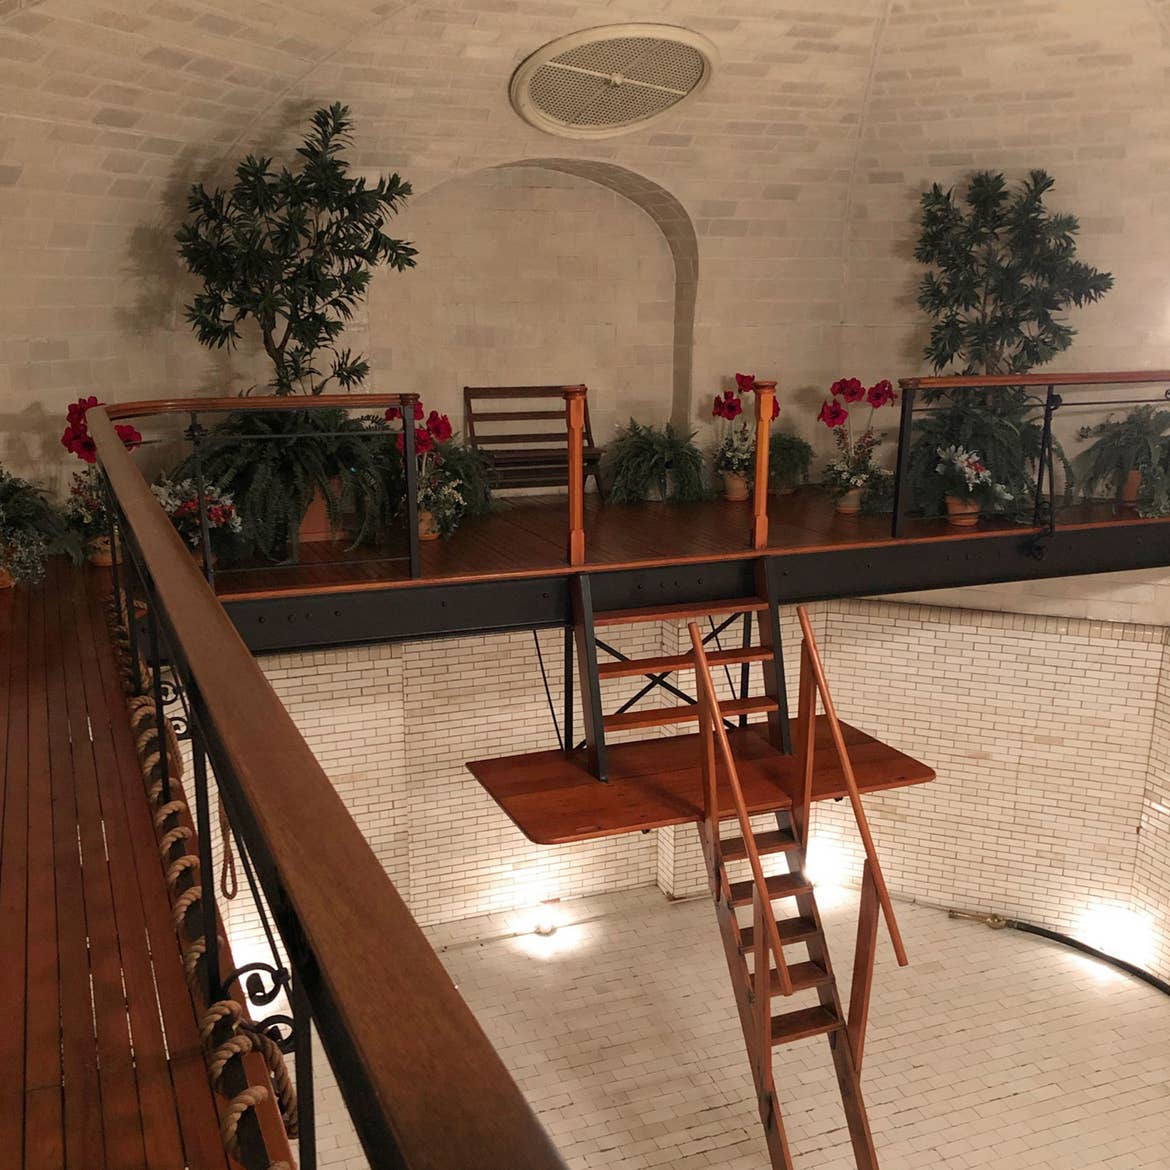 The empty indoor pool of the Biltmore Estate in the evening with an elaborate wooden ladder for swimmers surrounded by lush greenery.